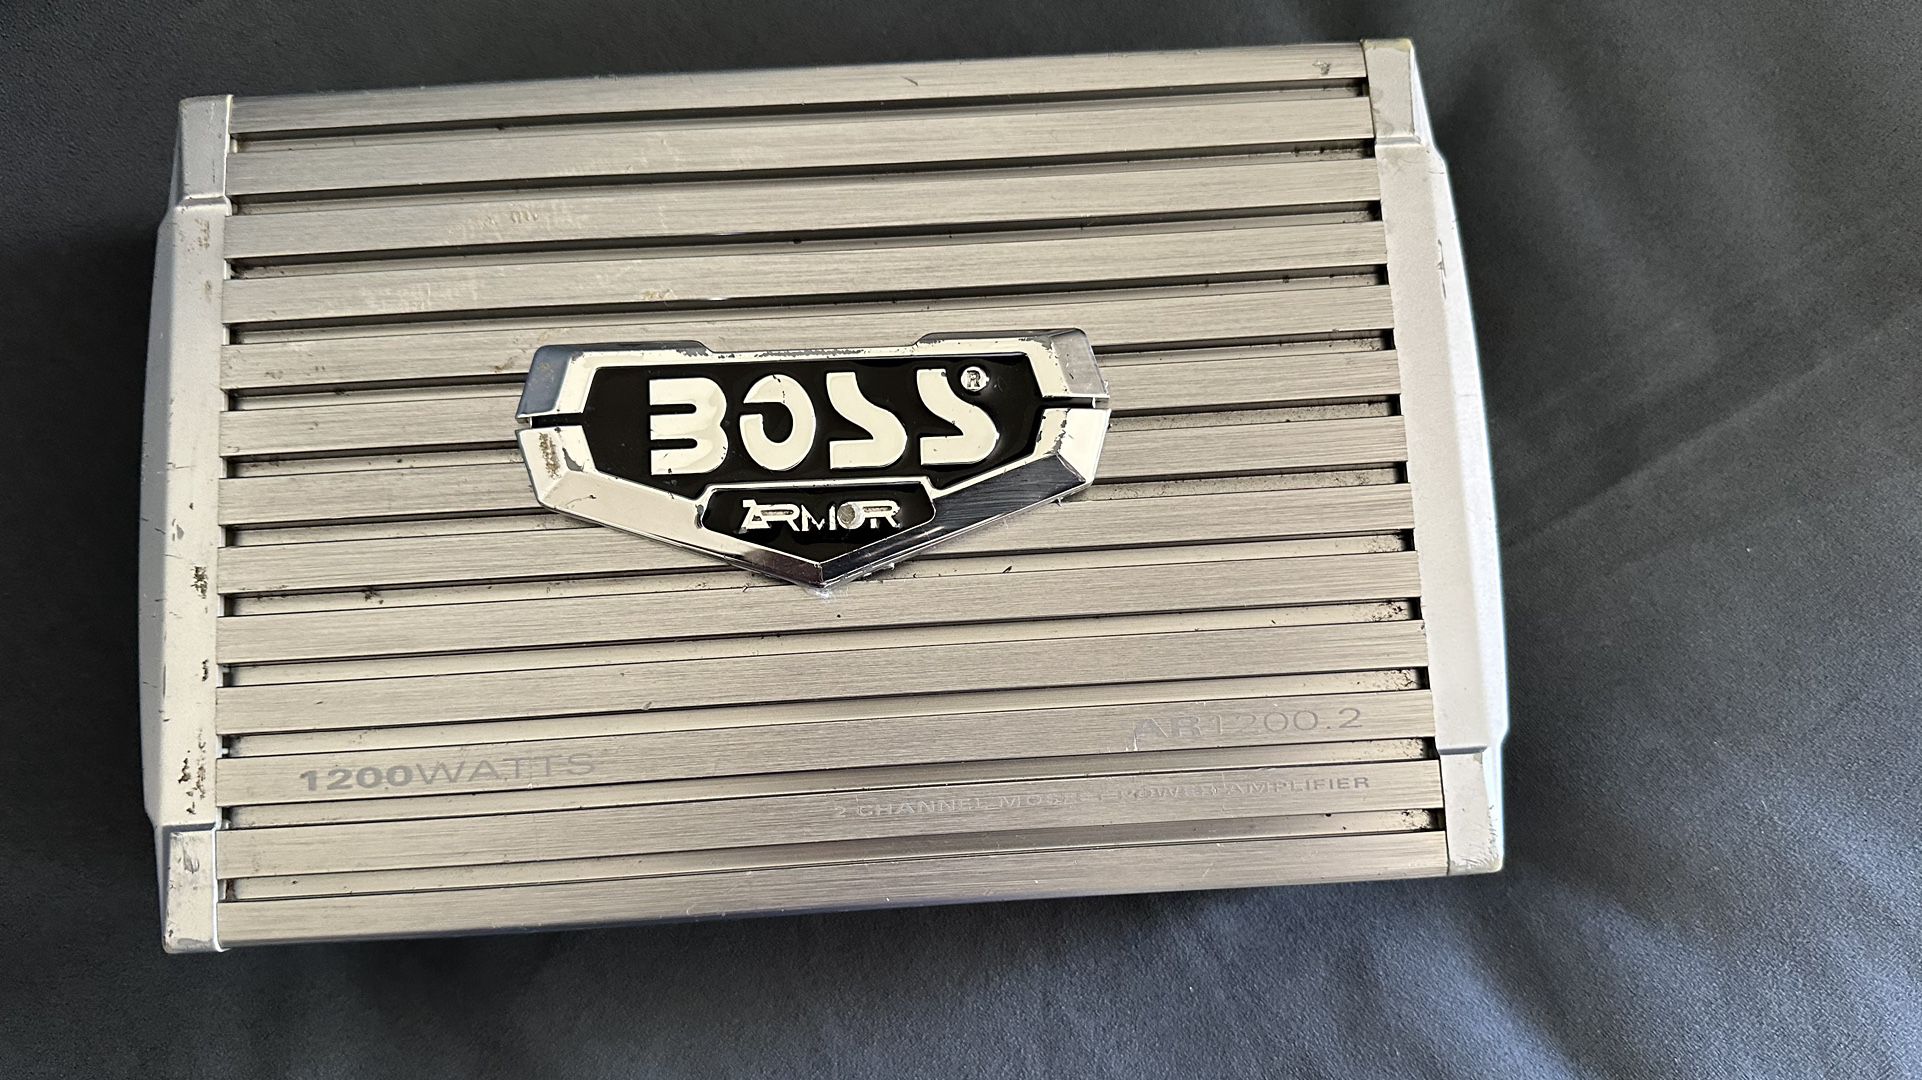 Boss Audio 1200.2 Car Amp Amplifier Works Good 2 Channel For Car Stereo System Door Speakers 